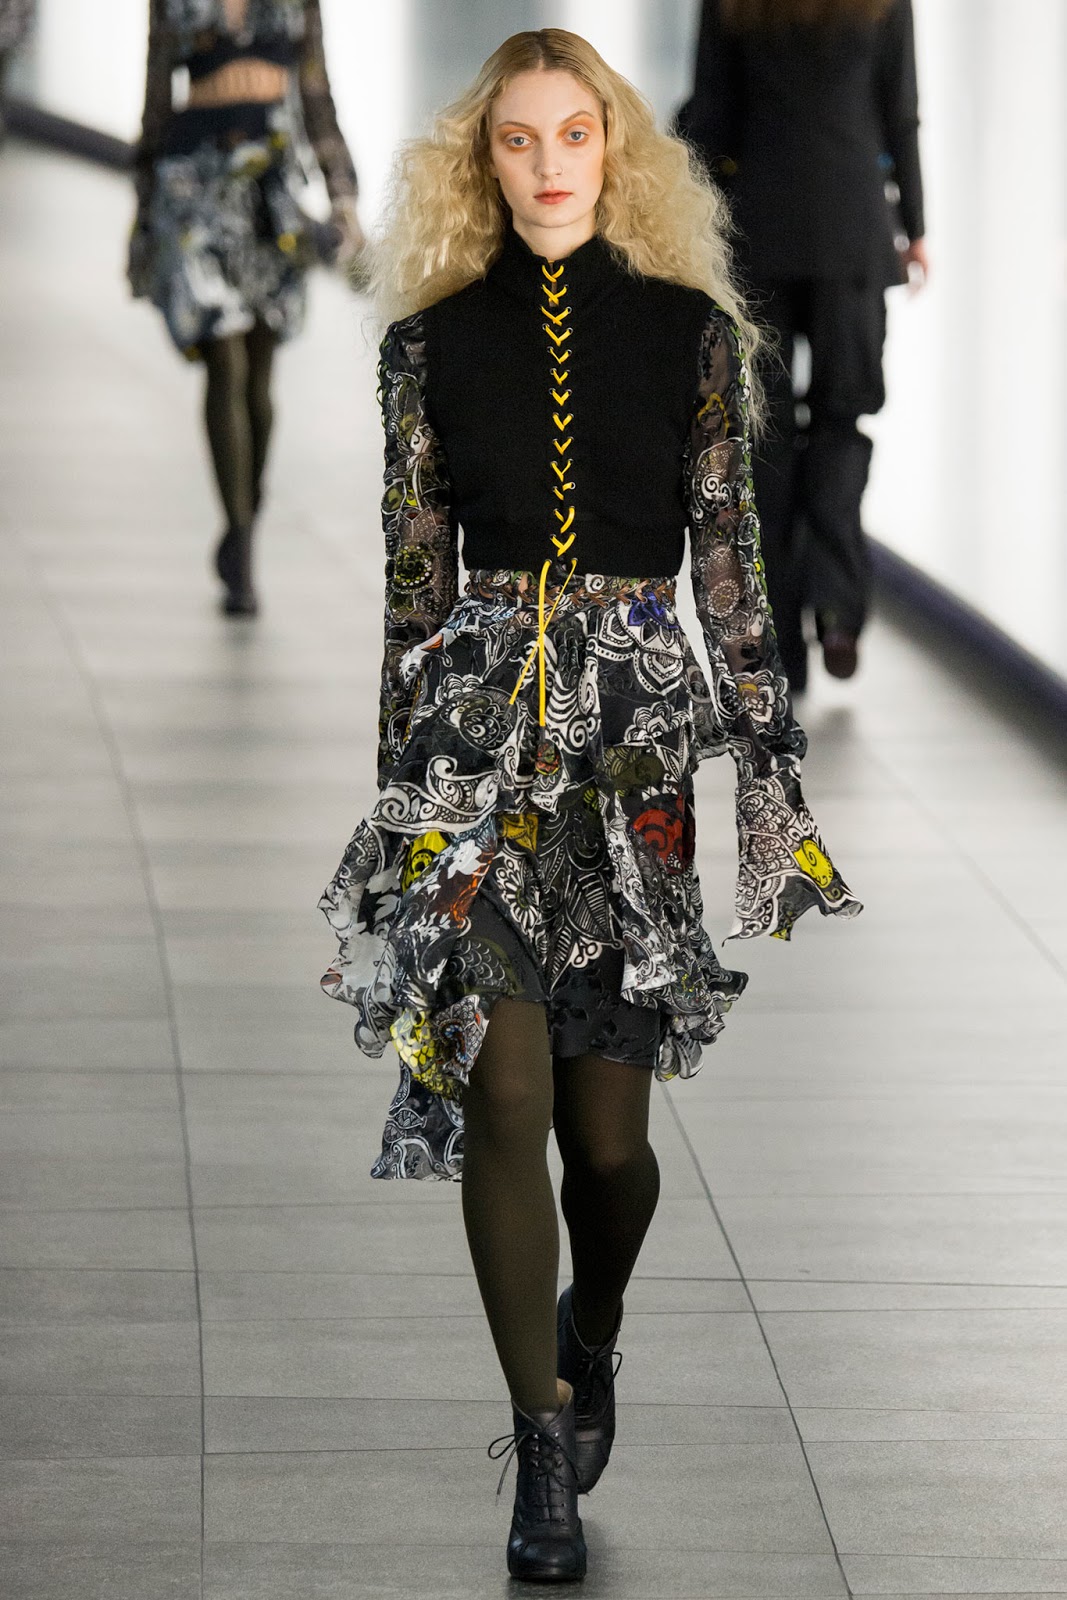 Cool Preen Style February 25, 2015 | ZsaZsa Bellagio - Like No Other